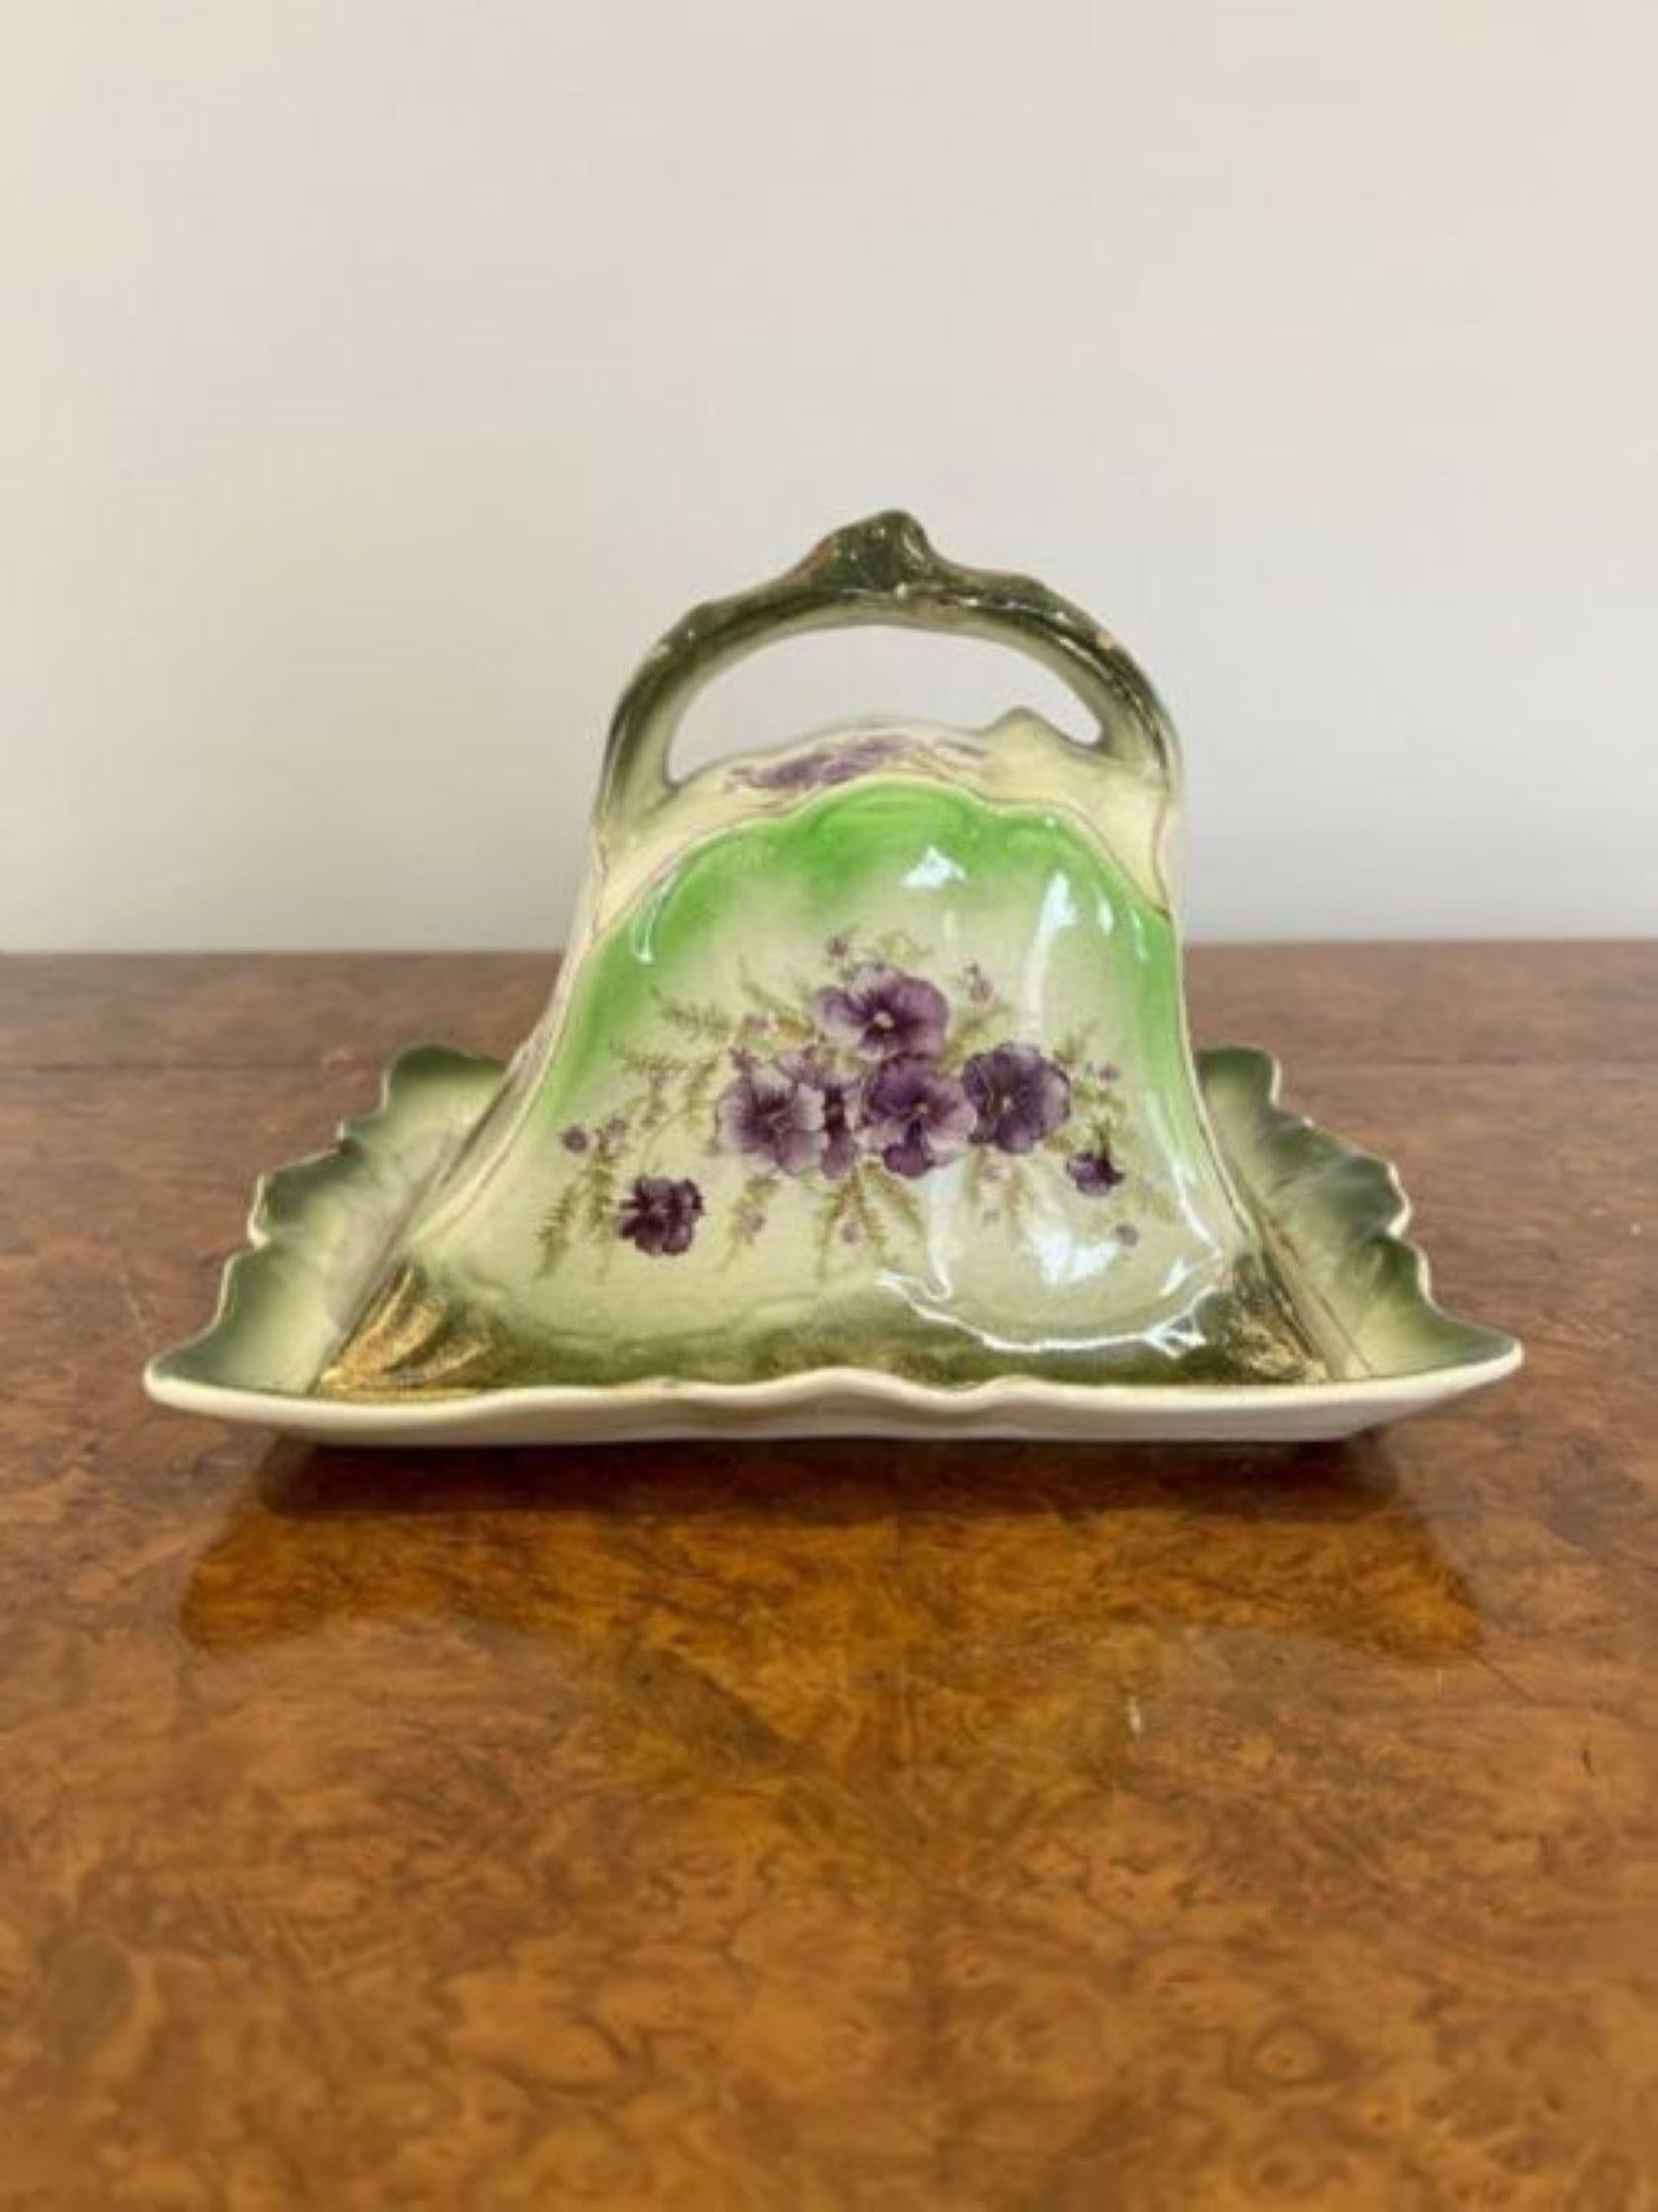 Original antique Edwardian cheese dish and cover having a original antique cheese dish and cover in wonderful floral decoration in hand painted green, purple, gold and white colours 